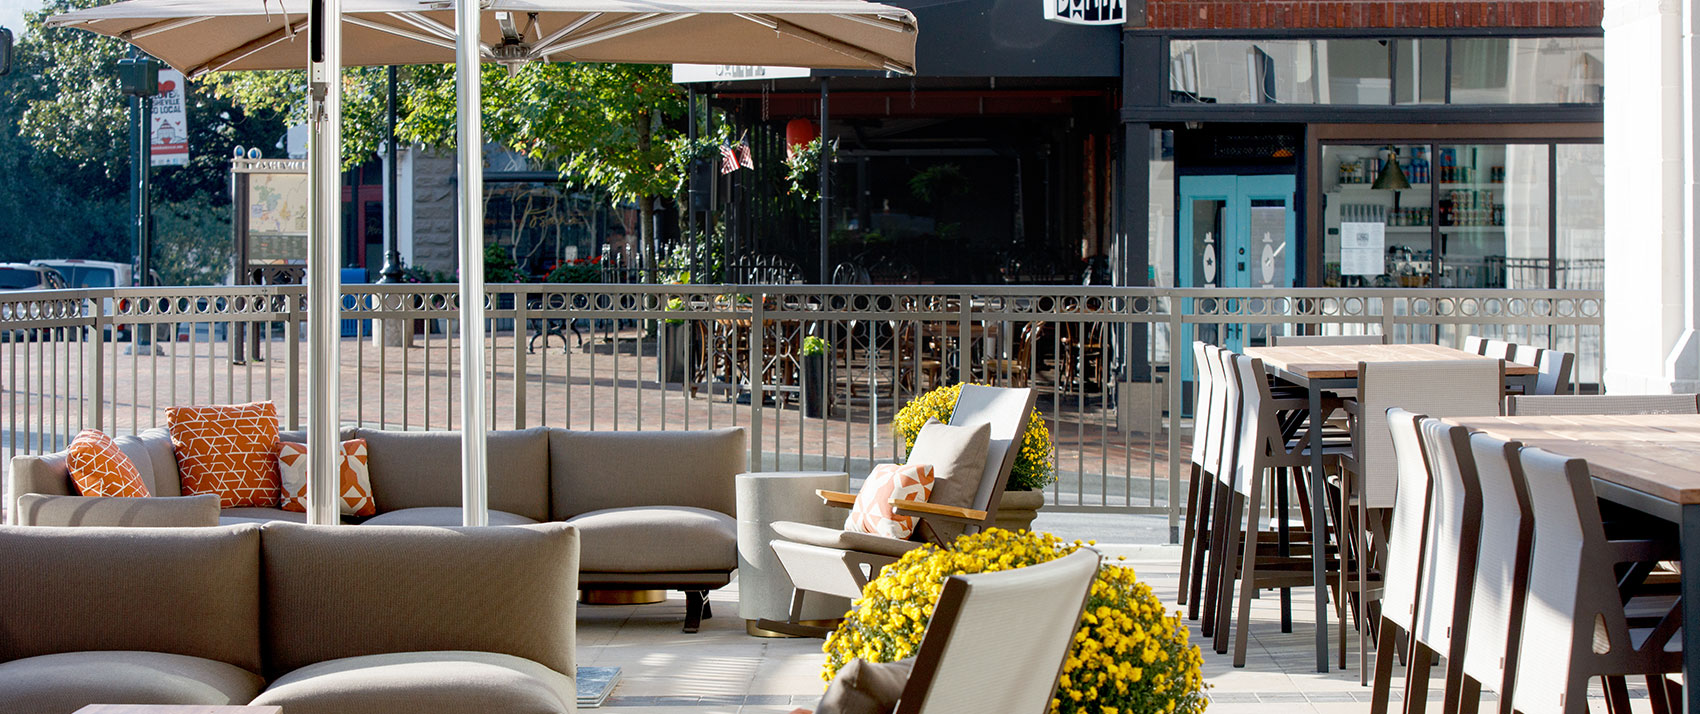 outdoor patio with downtown streets in the background